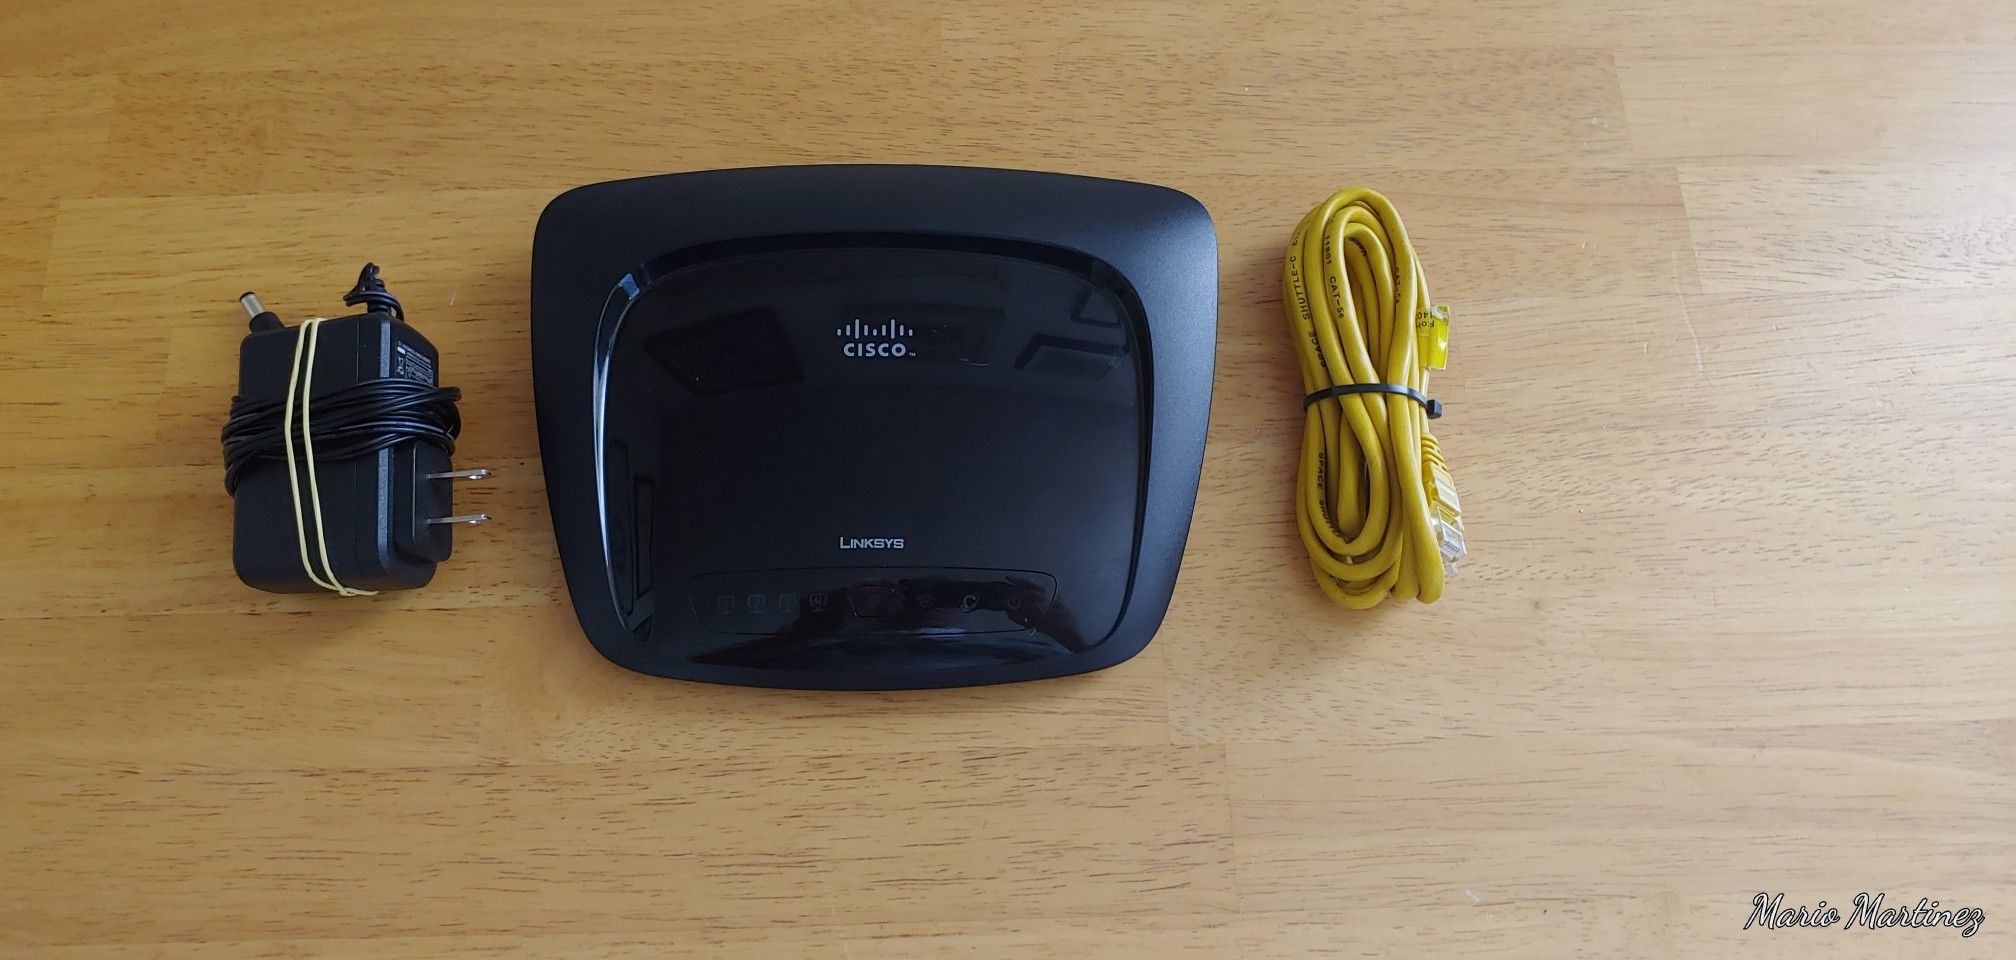 Linksys Cisco Wireless-N Home Router (WRT120N)